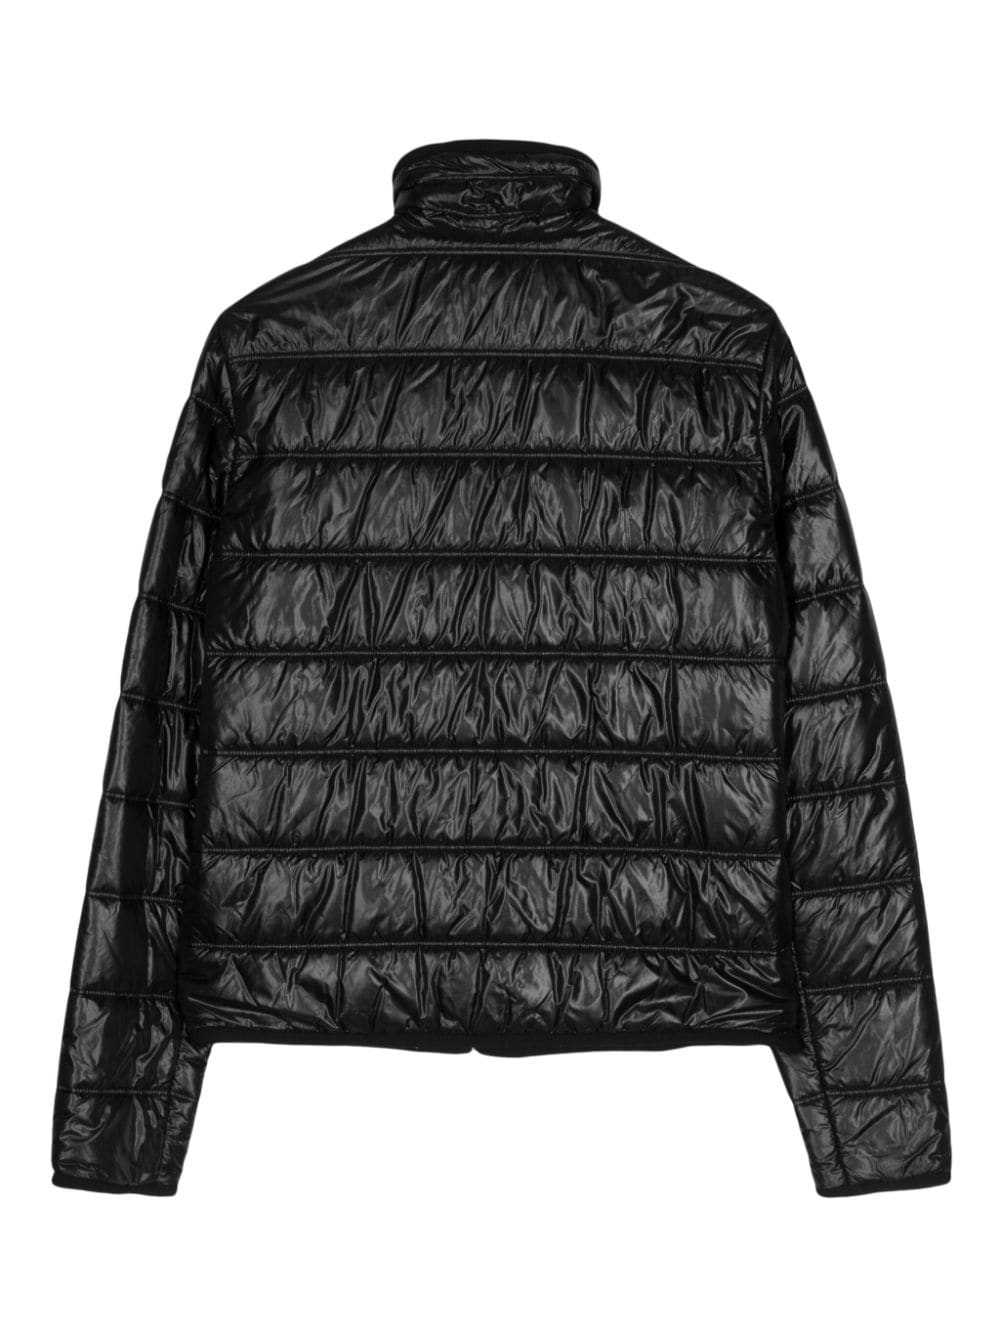 CHANEL Pre-Owned 2000 quilted zip-up jacket - Bla… - image 2